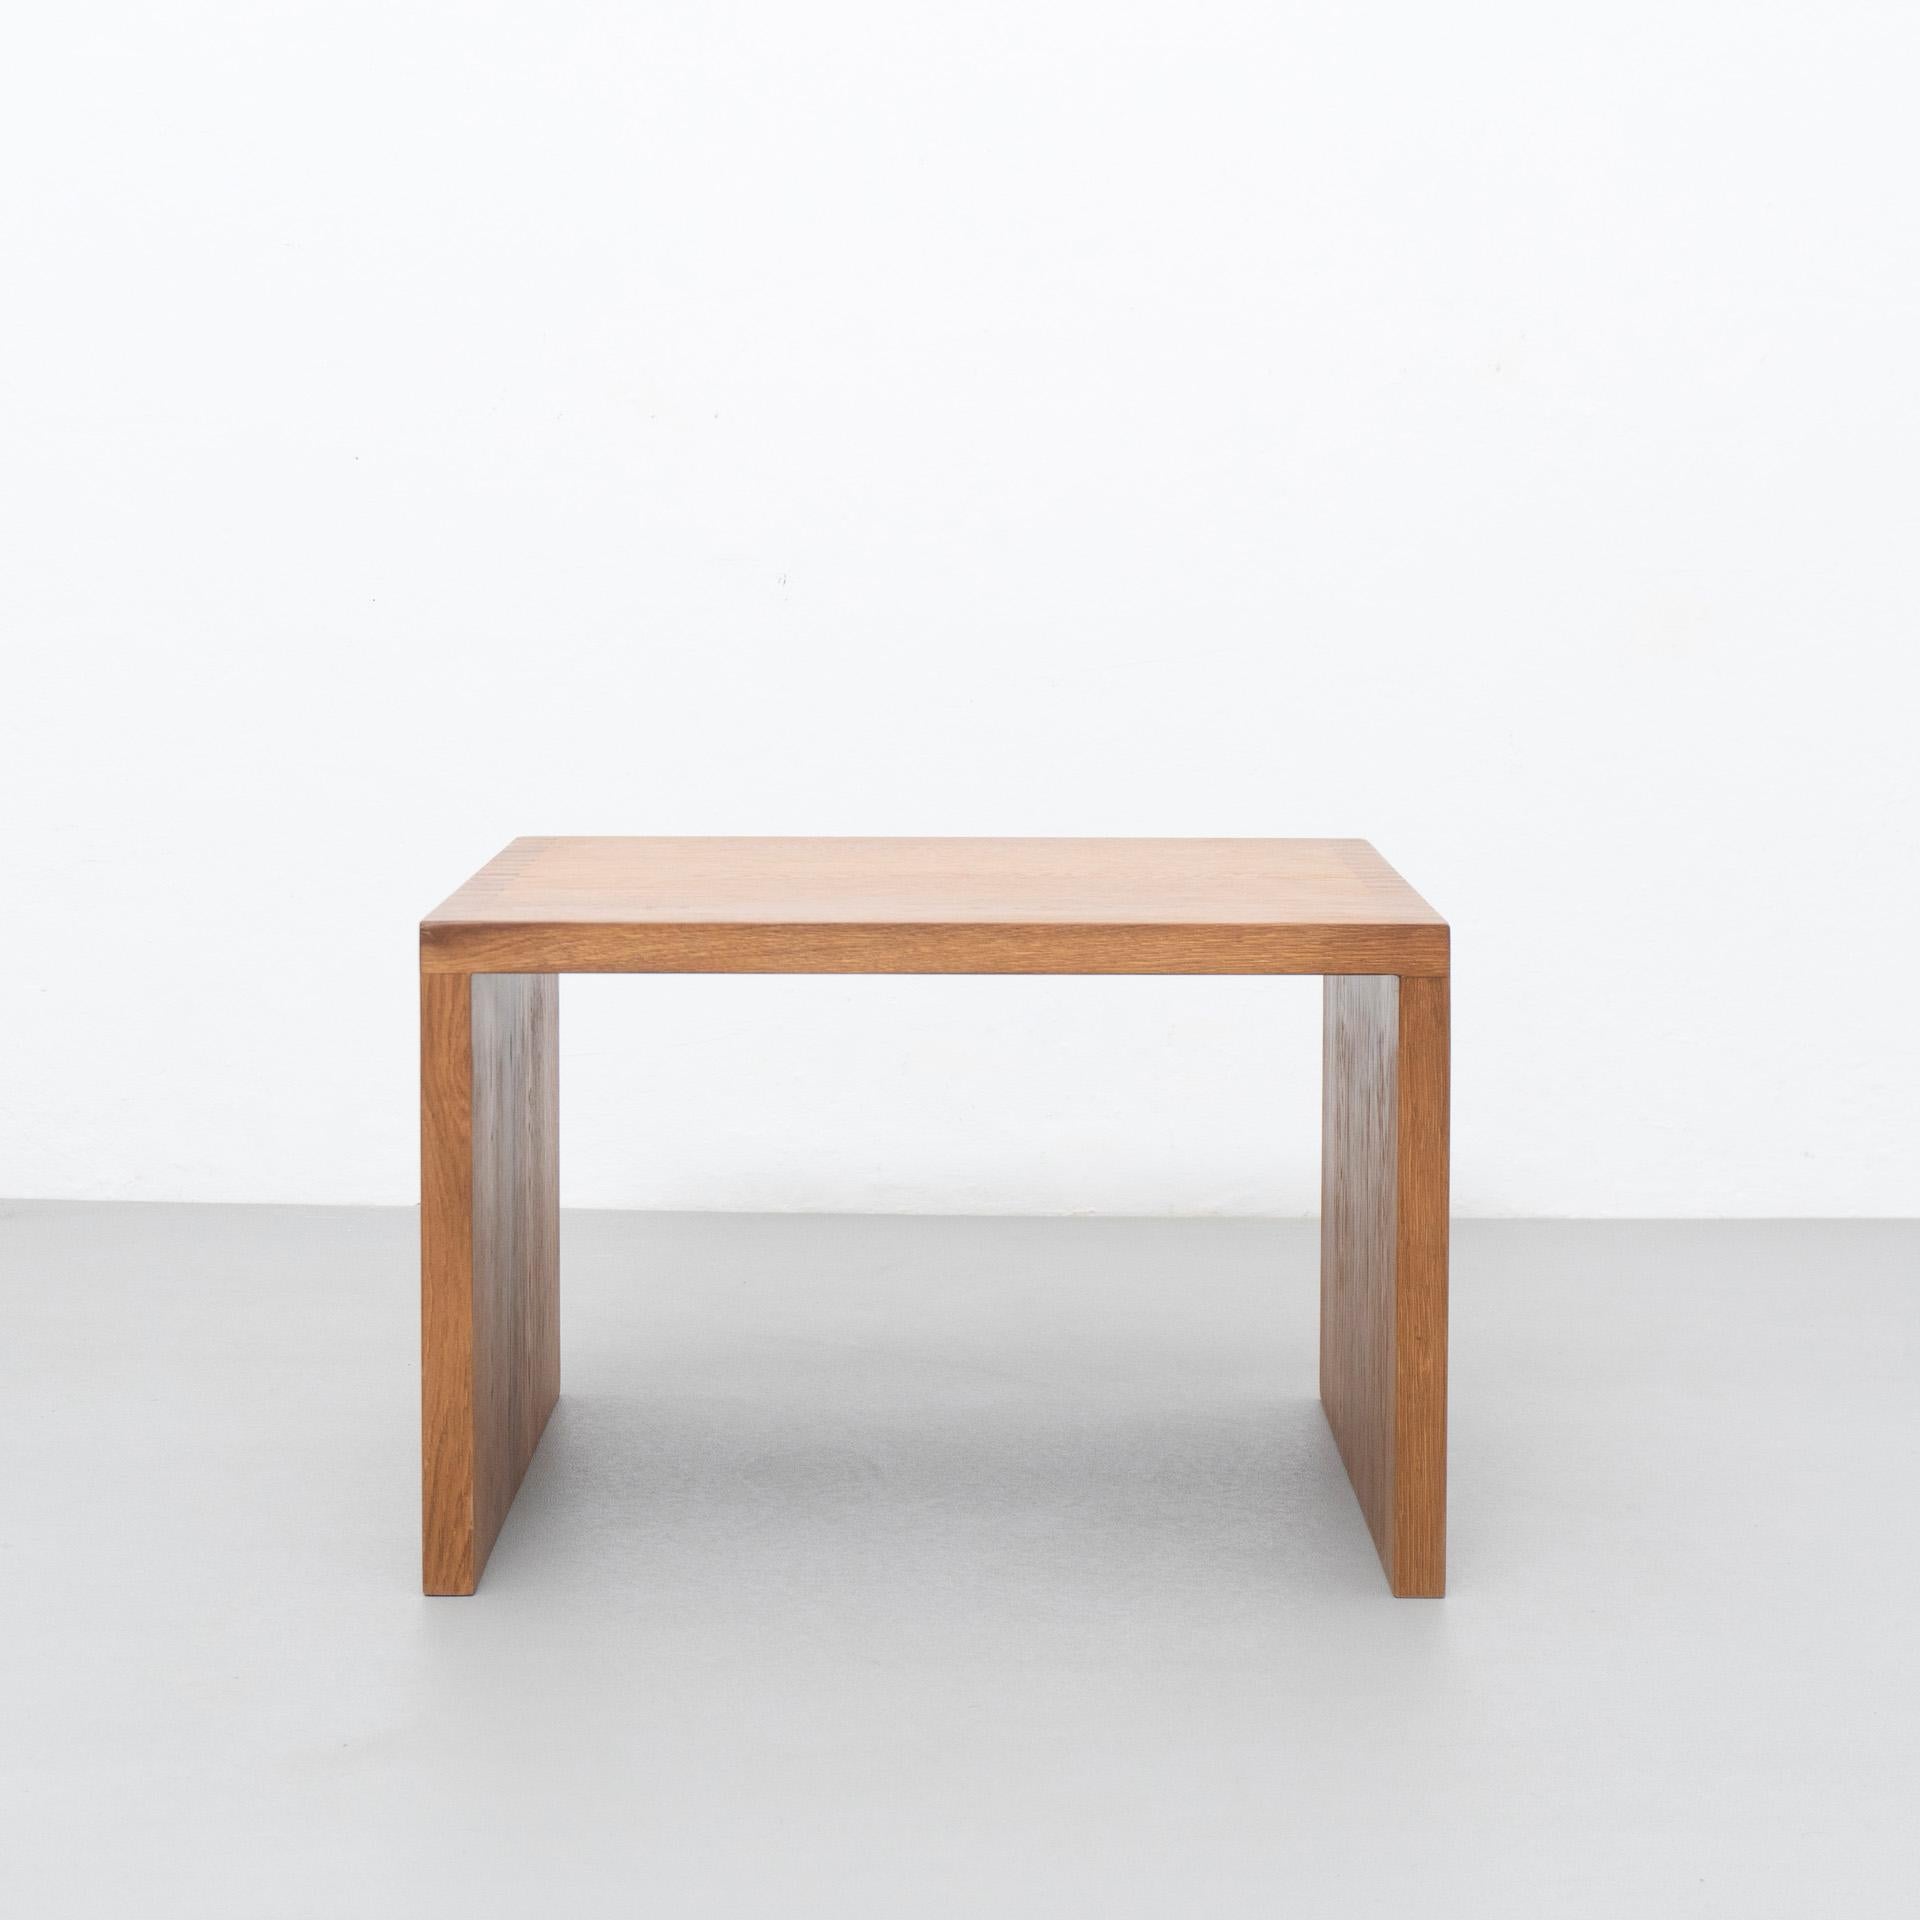 Table by Dada est. manufactured in Barcelona, 2021.

Material: Oak
Dimensions: 60 cm D x 60 cm W x 40 cm H 

There is the possibility of making it in different measures and woods.

Dada Est. Makes a handmade furniture production with the best